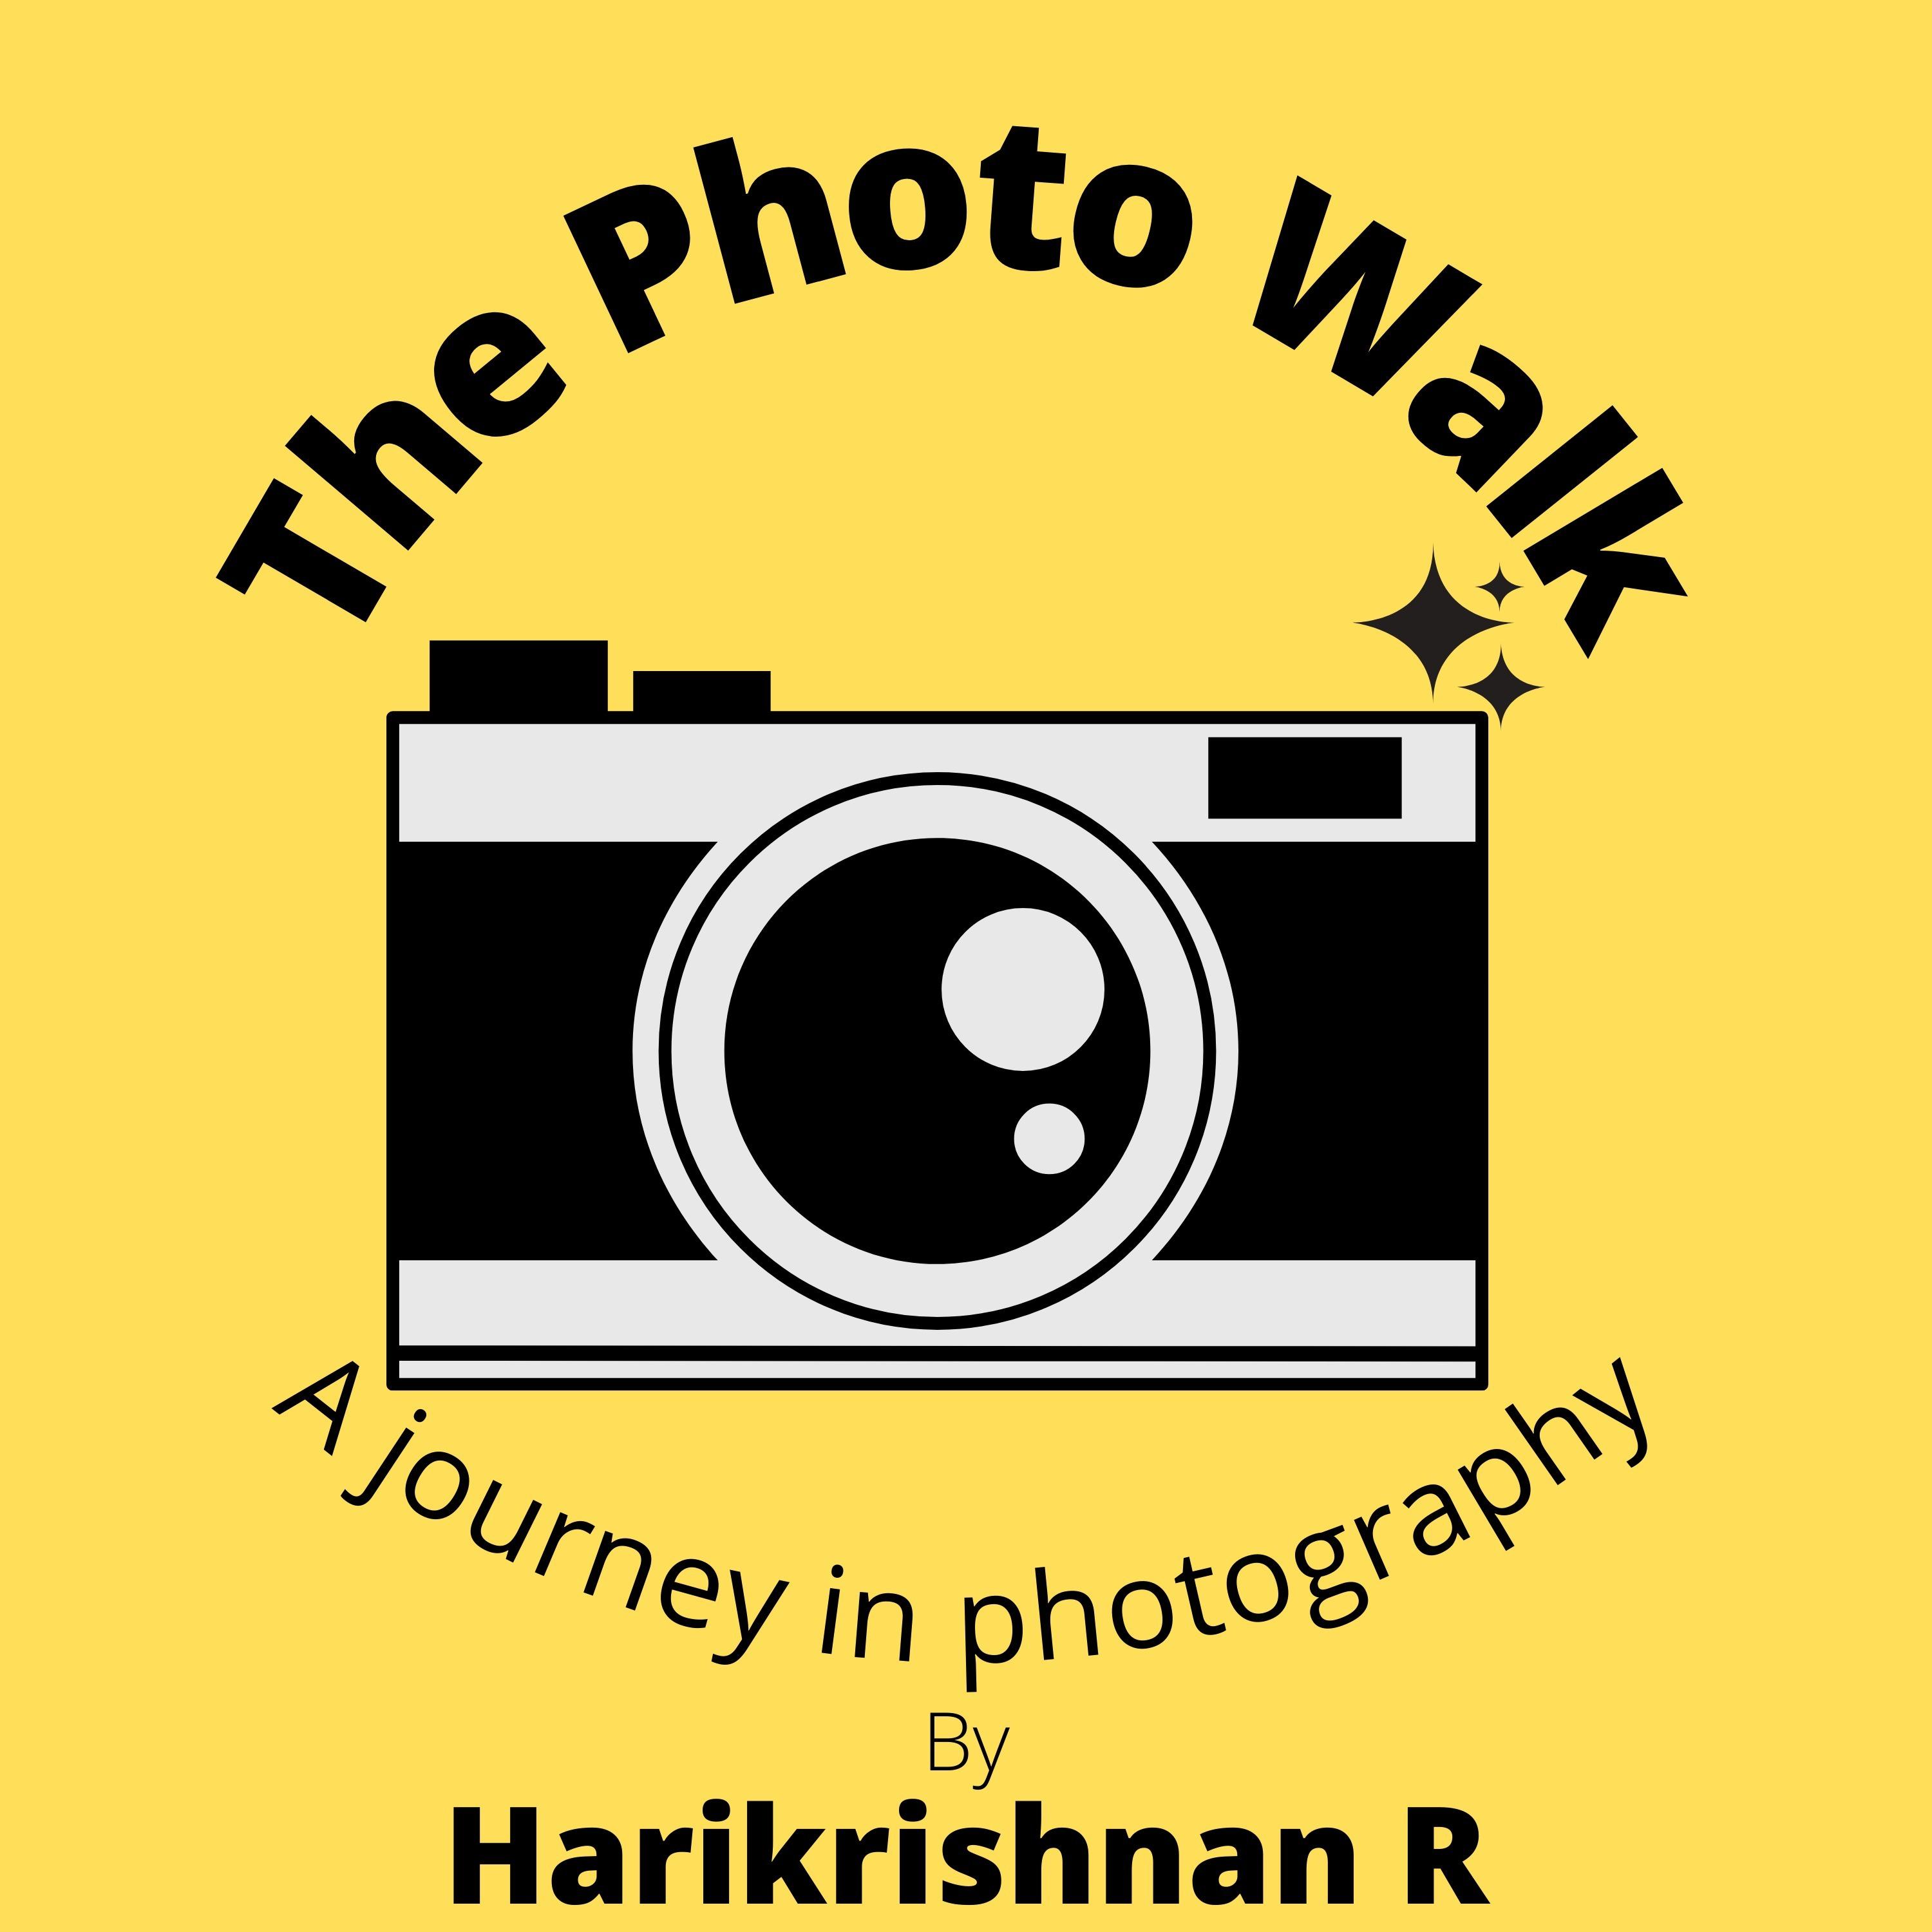 The Photo Walk - A journey in photography